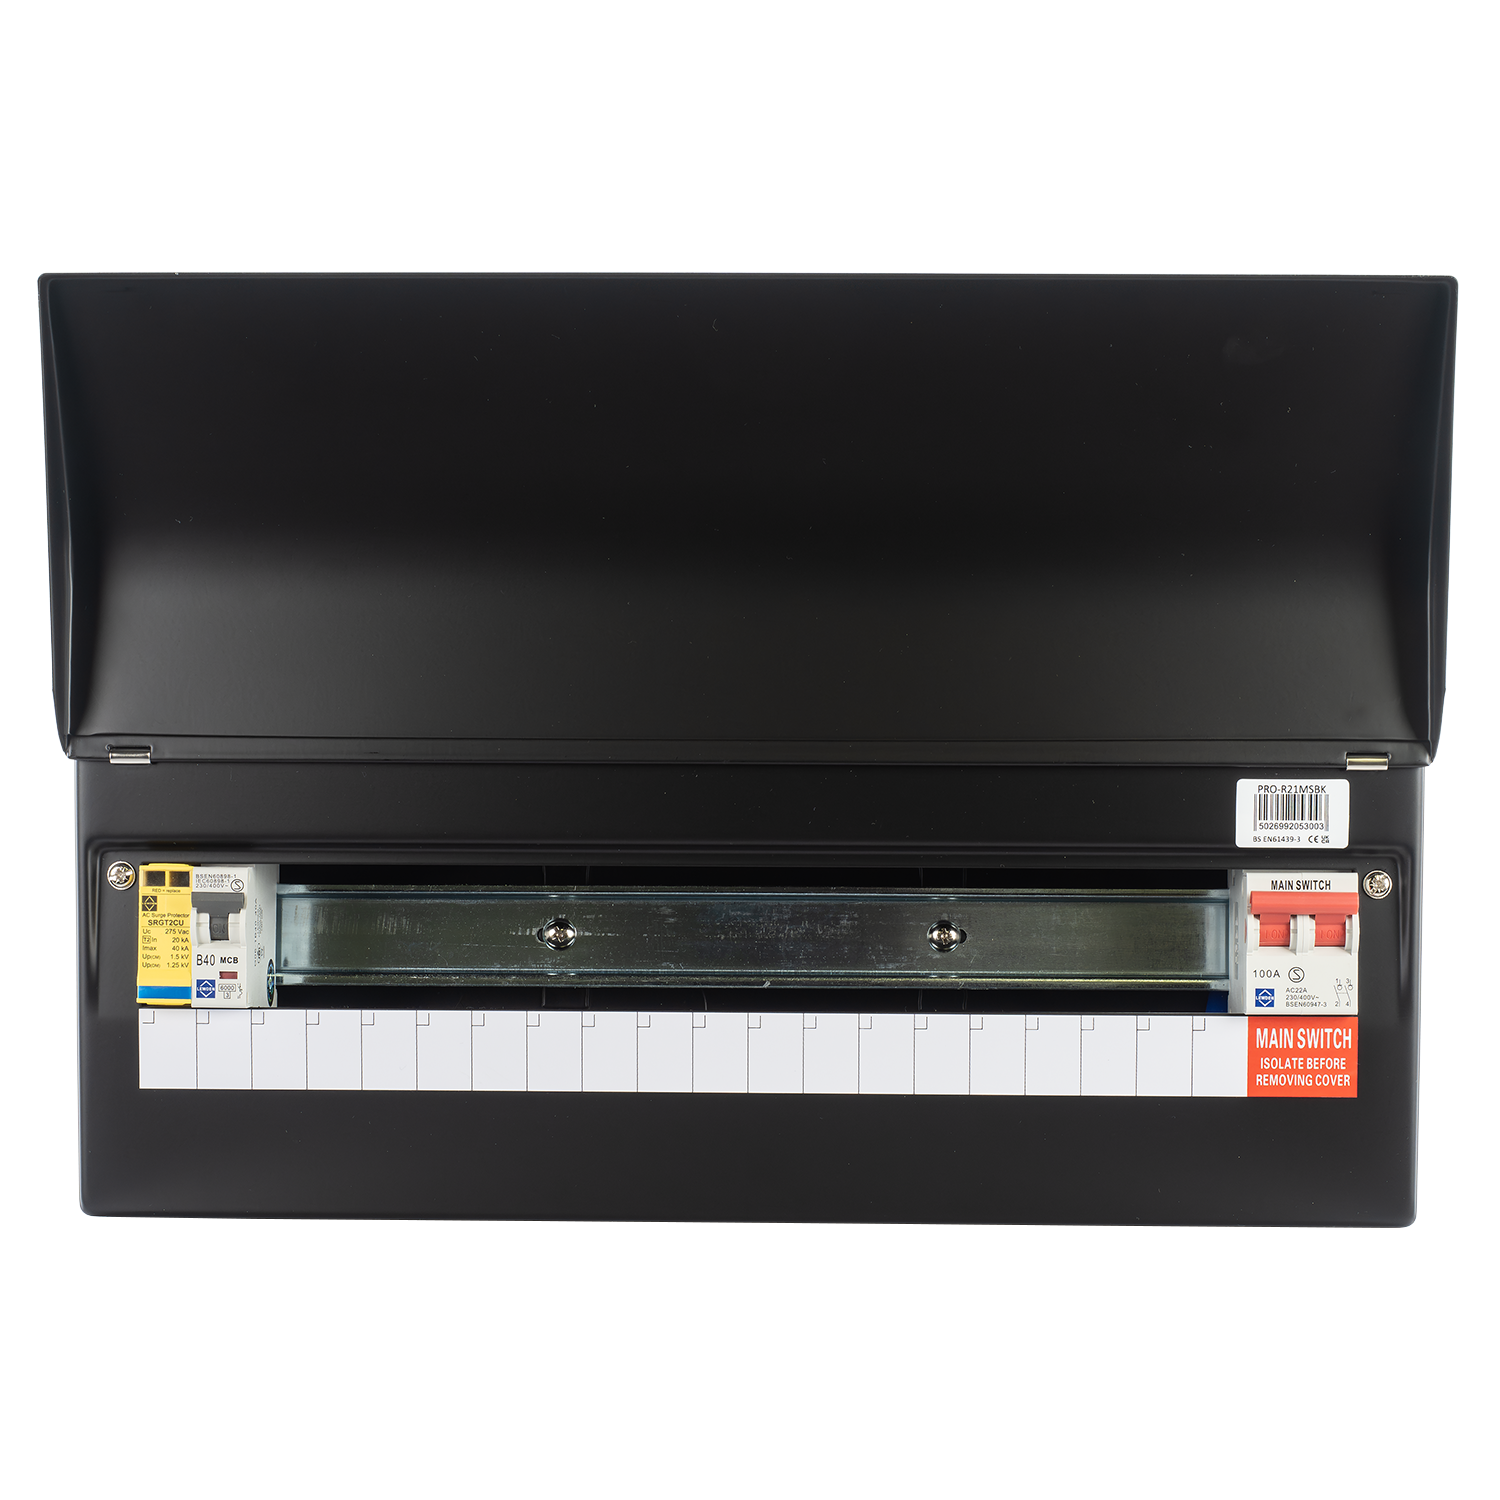 Lewden PRO-R21MSBK Black 18 Way RCBO Consumer Unit with Surge Protection